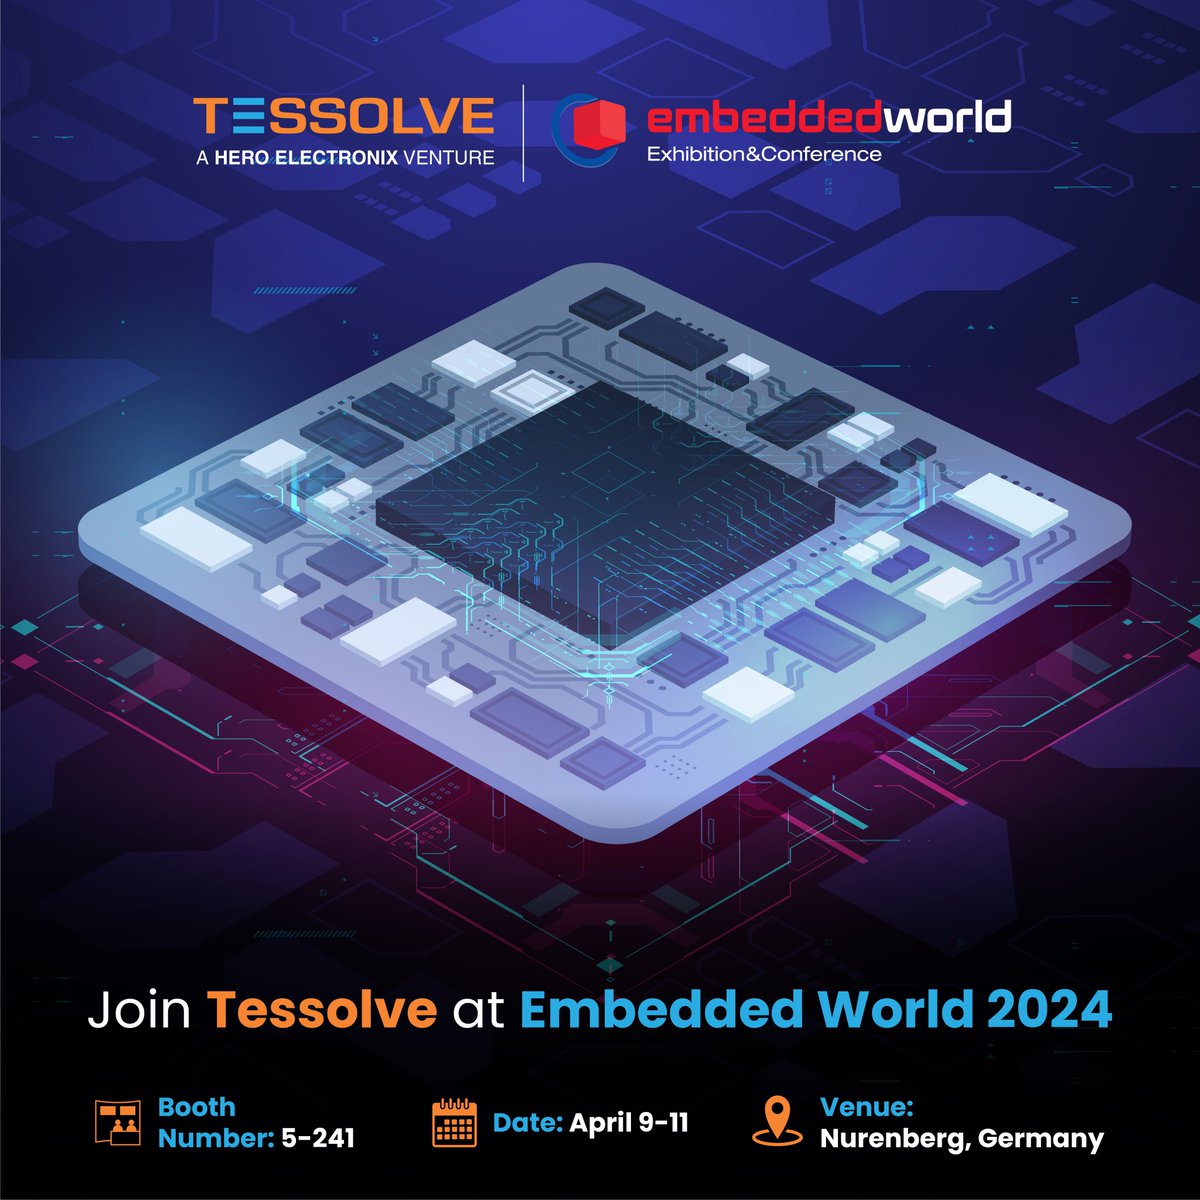 Join #Tessolve at the Embedded World Conference in Nuremberg, Germany, #April9-11. Visit Booth #5-241 to explore the latest hardware, software, automotive, and embedded systems innovations for IoT applications. 

#EW2024 #Embeddedsystems #STAuthorizedPartner

@ST_World